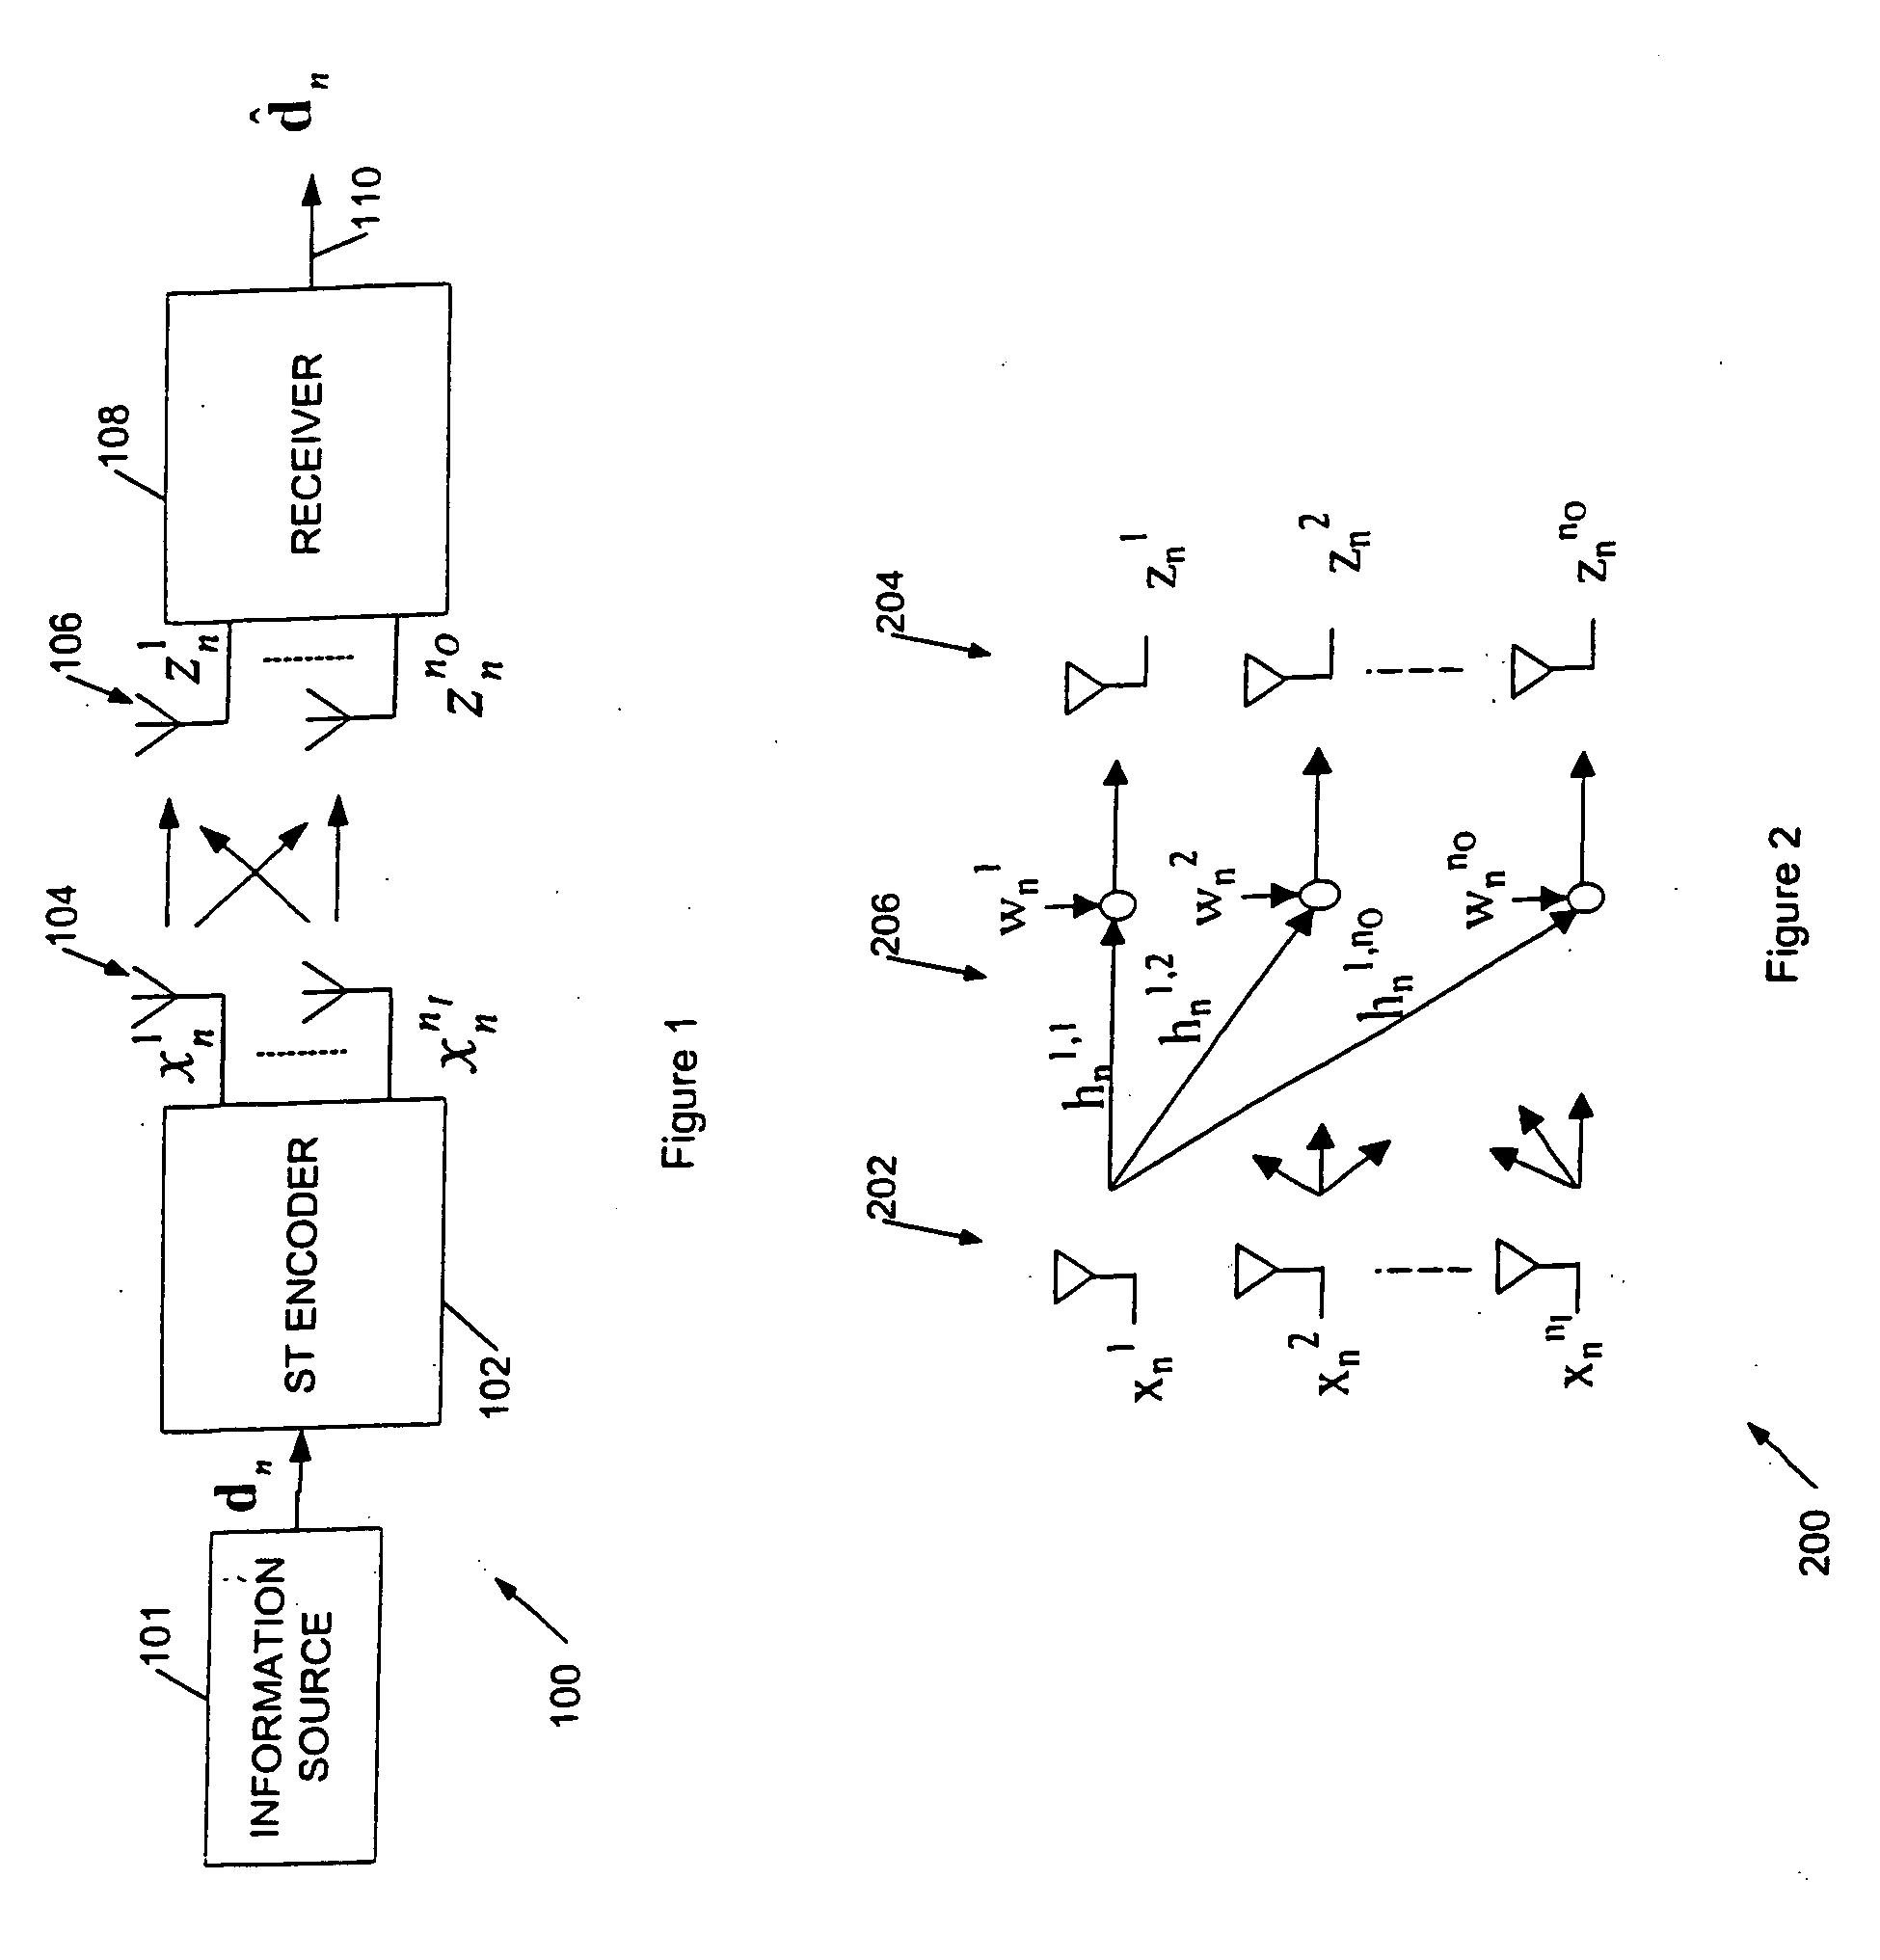 Communications apparatus and methods